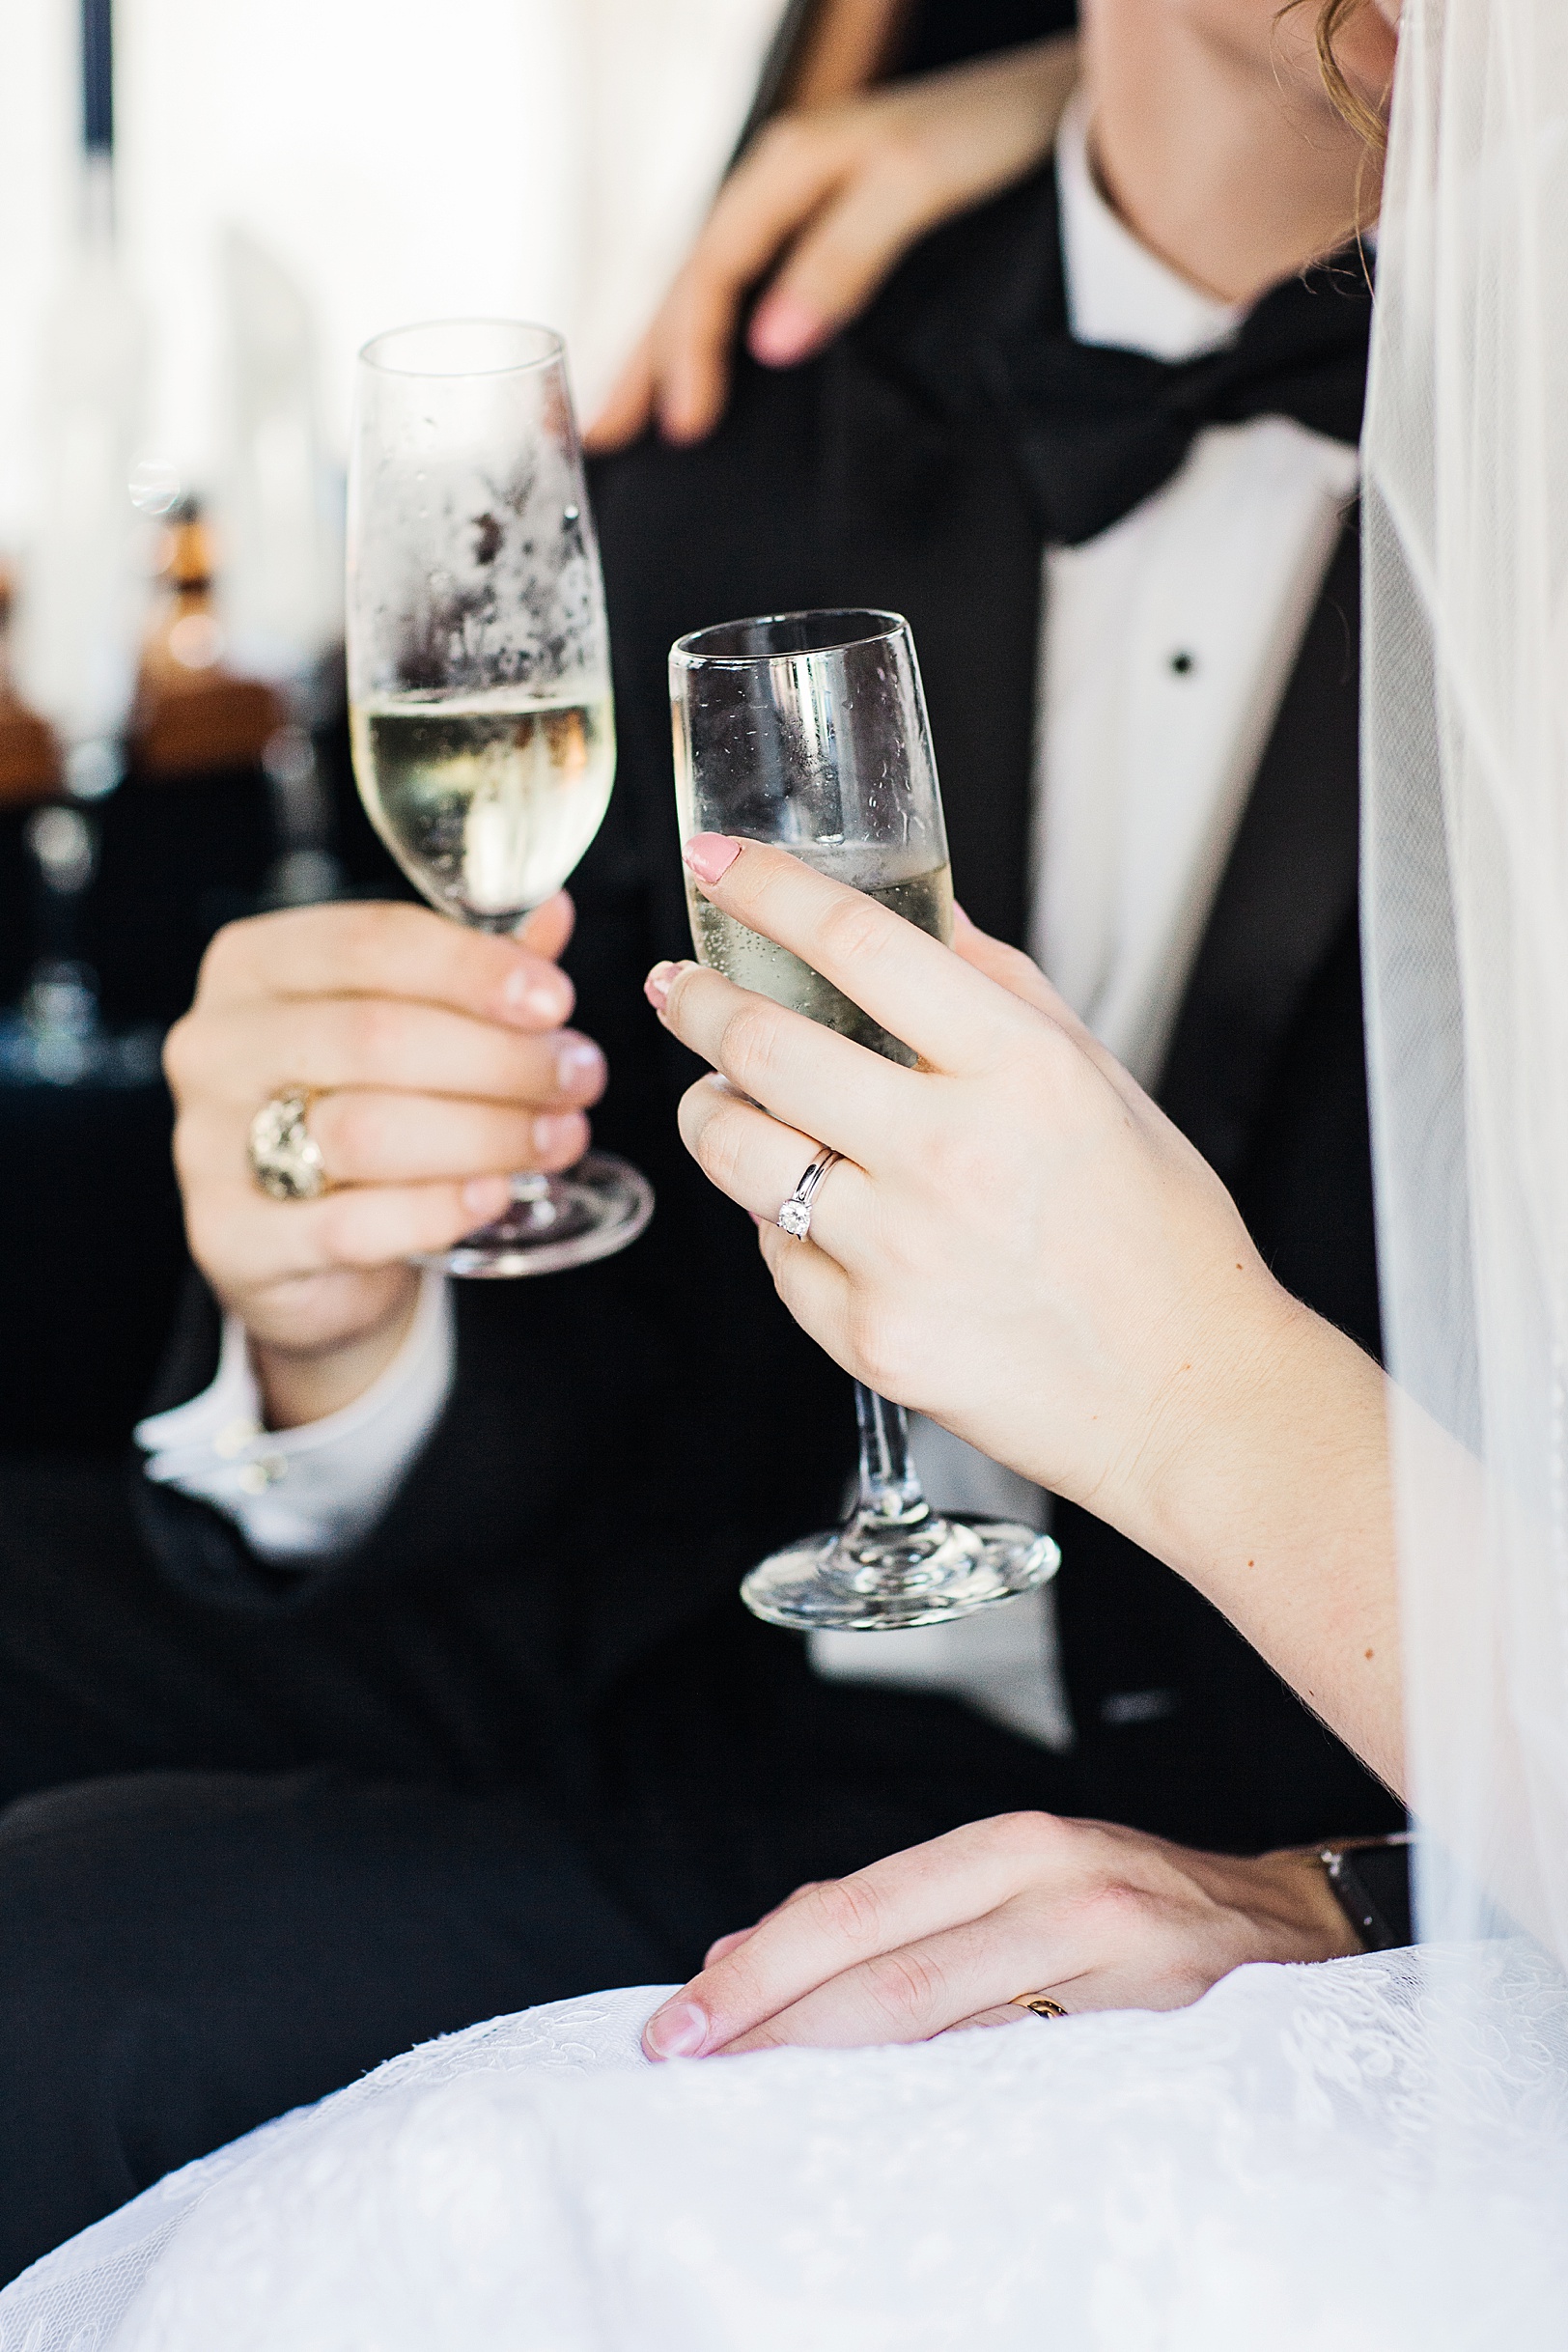 Detail Shot of Champagne Glasses held by Bride and Groom | Kaitlin Scott Photography